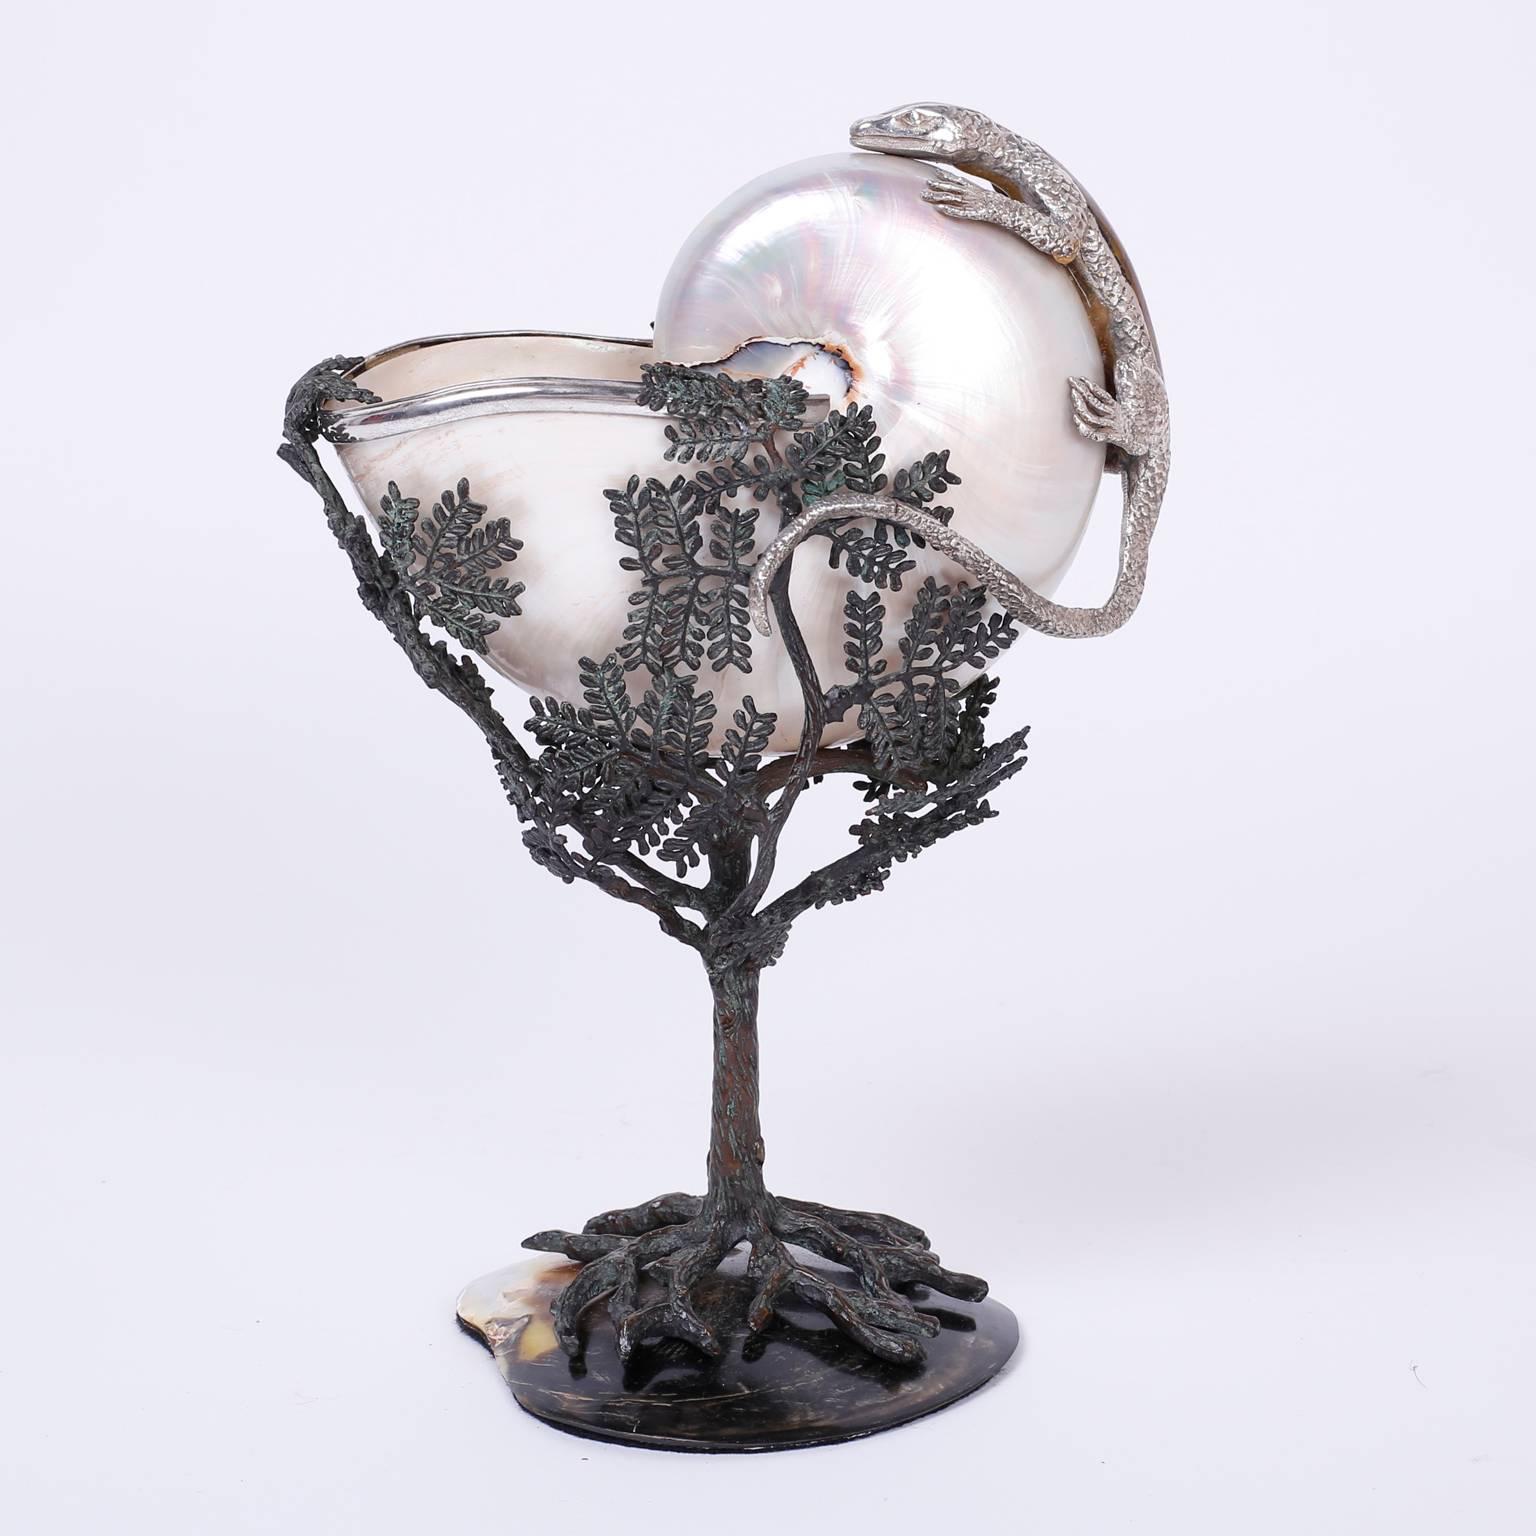 Here is a Mid-Century object of art that defines fantasy with an unlikely combination of materials and subjects as if in a dream. Silvered metal lizard sits atop a nautilus shell inside a metal tree with a bronze patina, mounted on a polished shell.